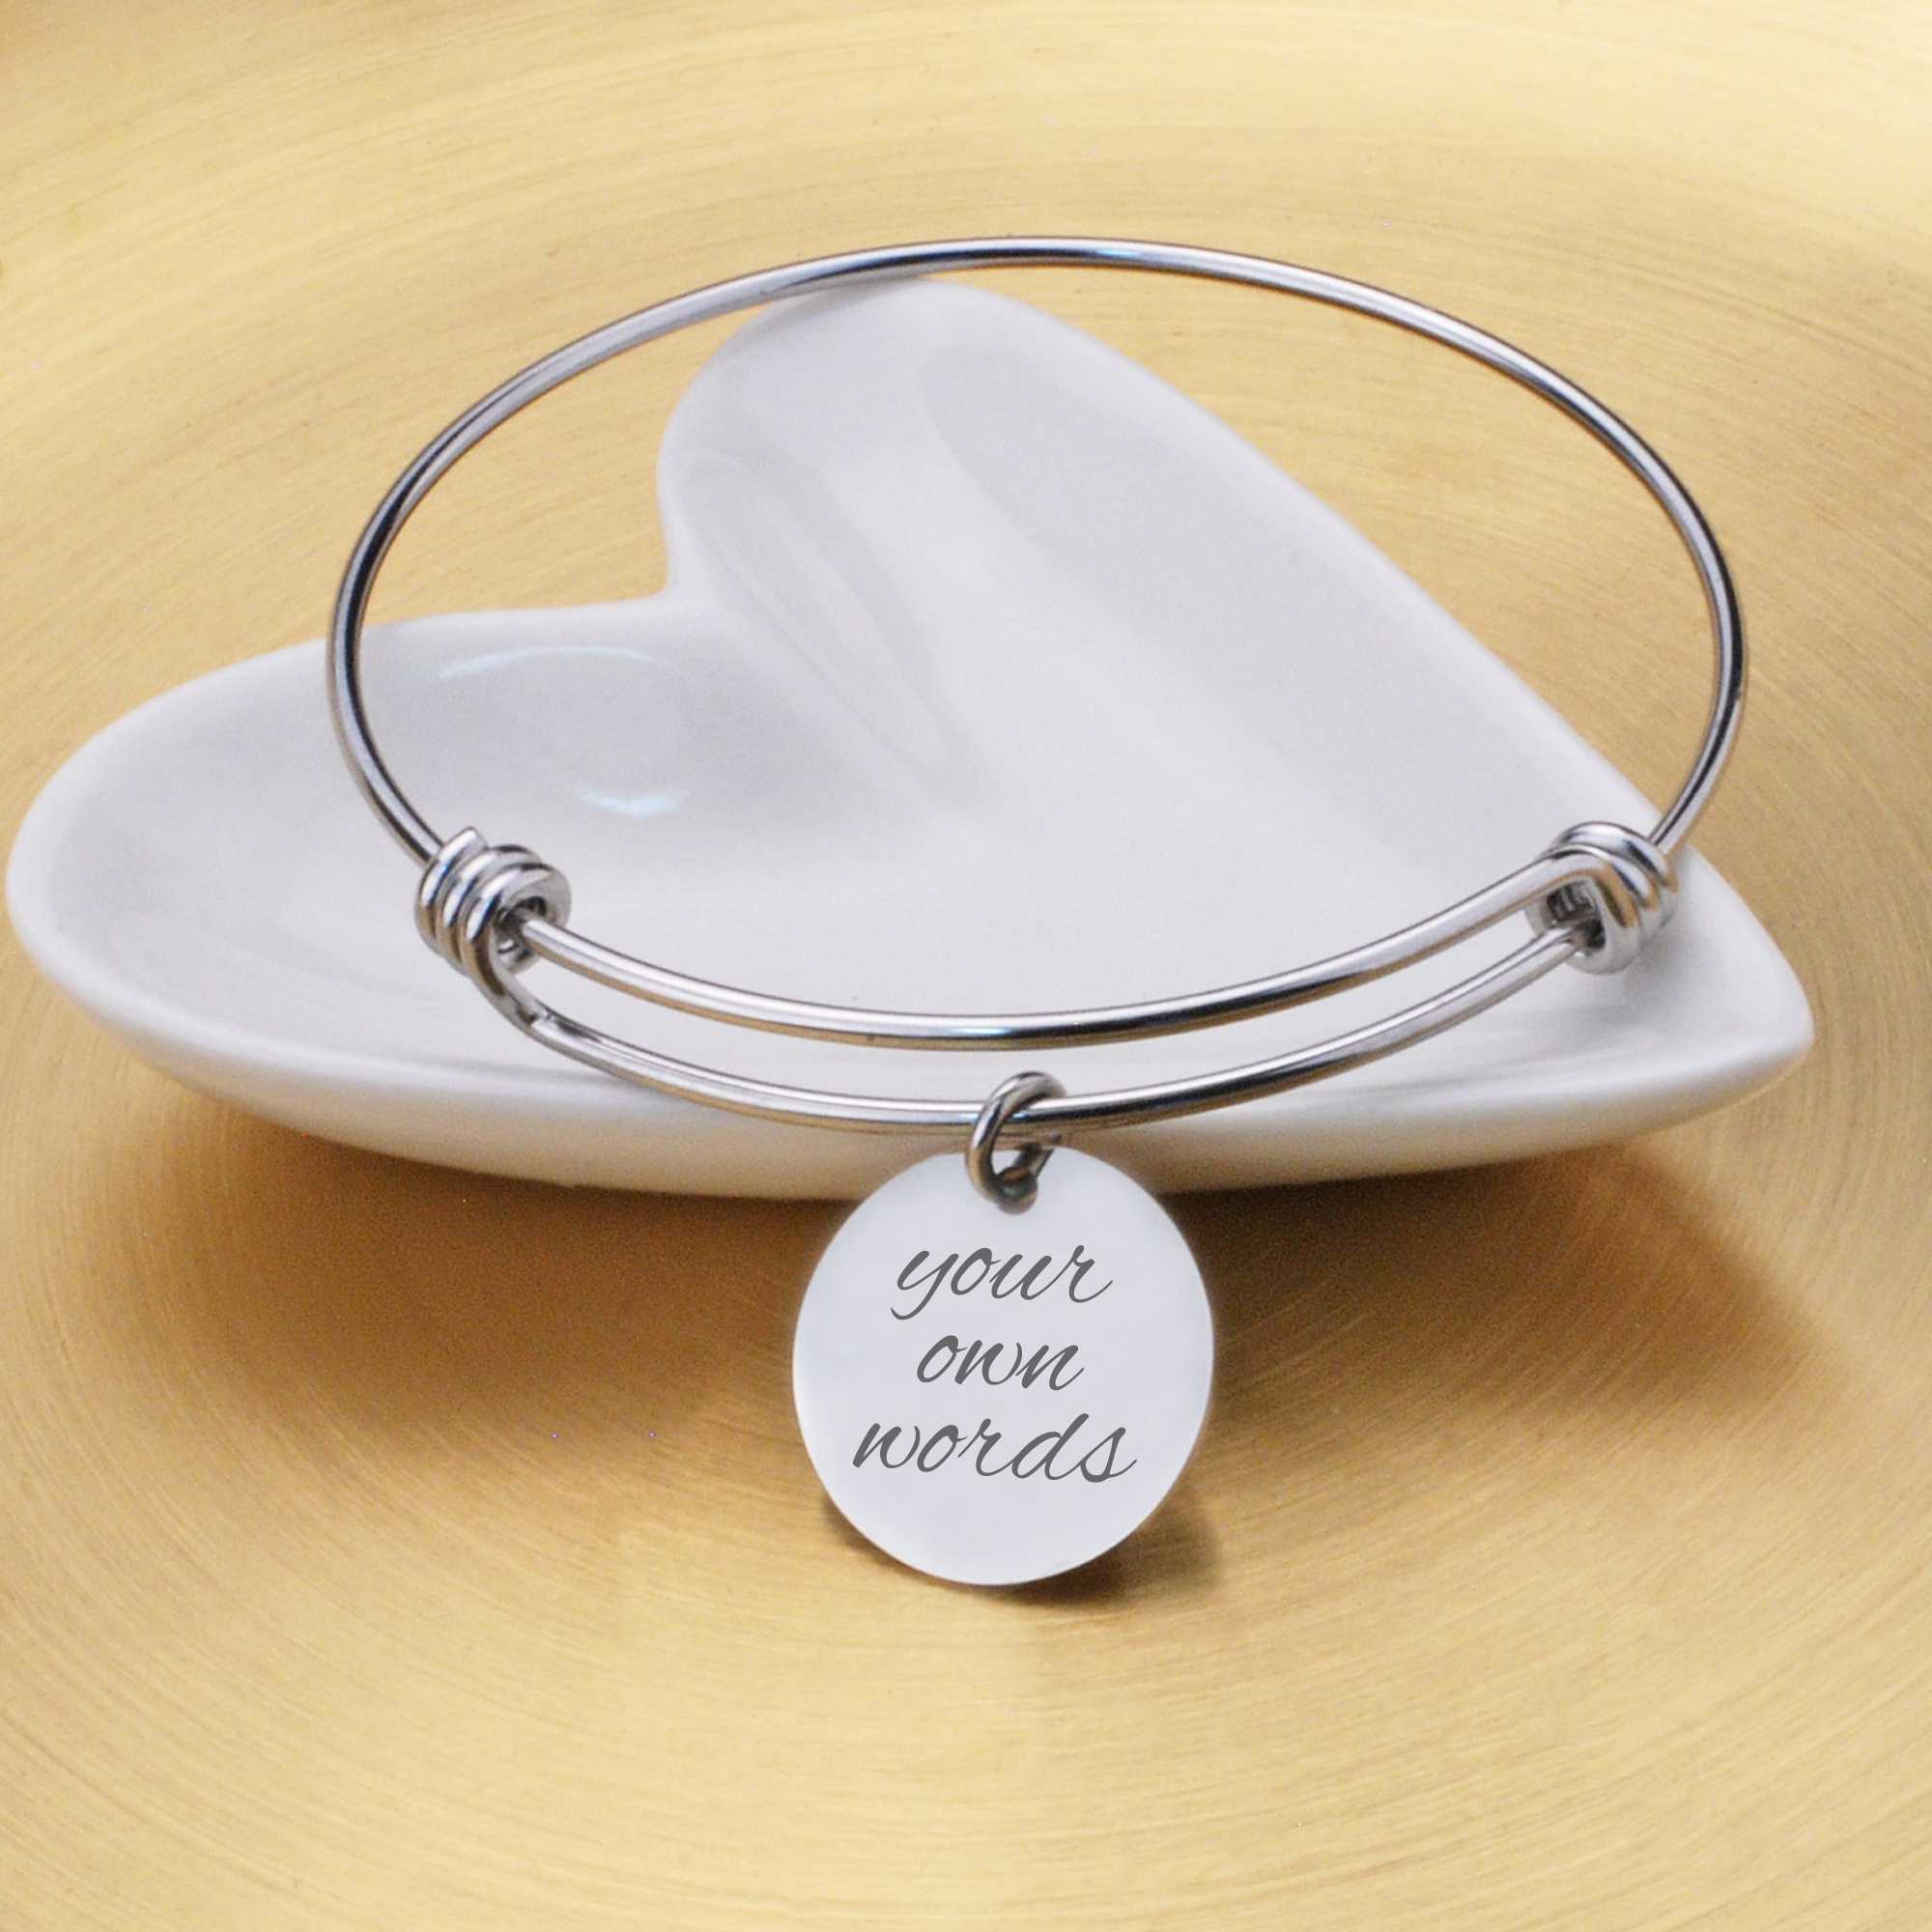 Adjustable Bangle Bracelet Engraved with Your Own Words